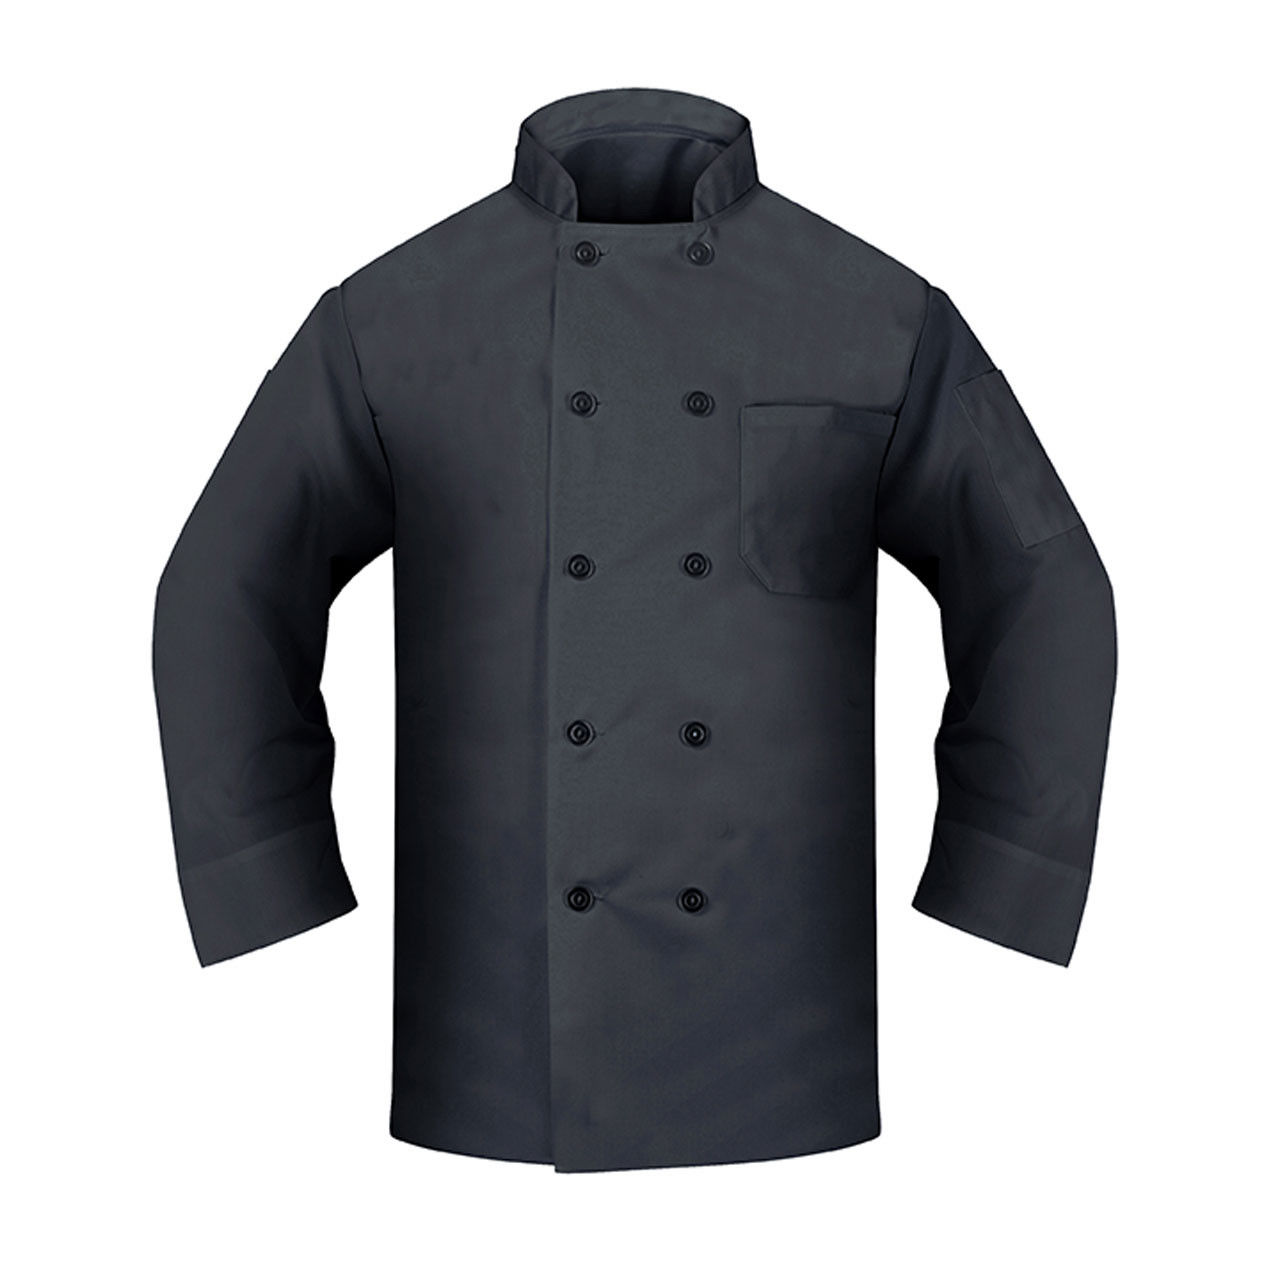 Does the black chef coat have pockets and what are their uses?